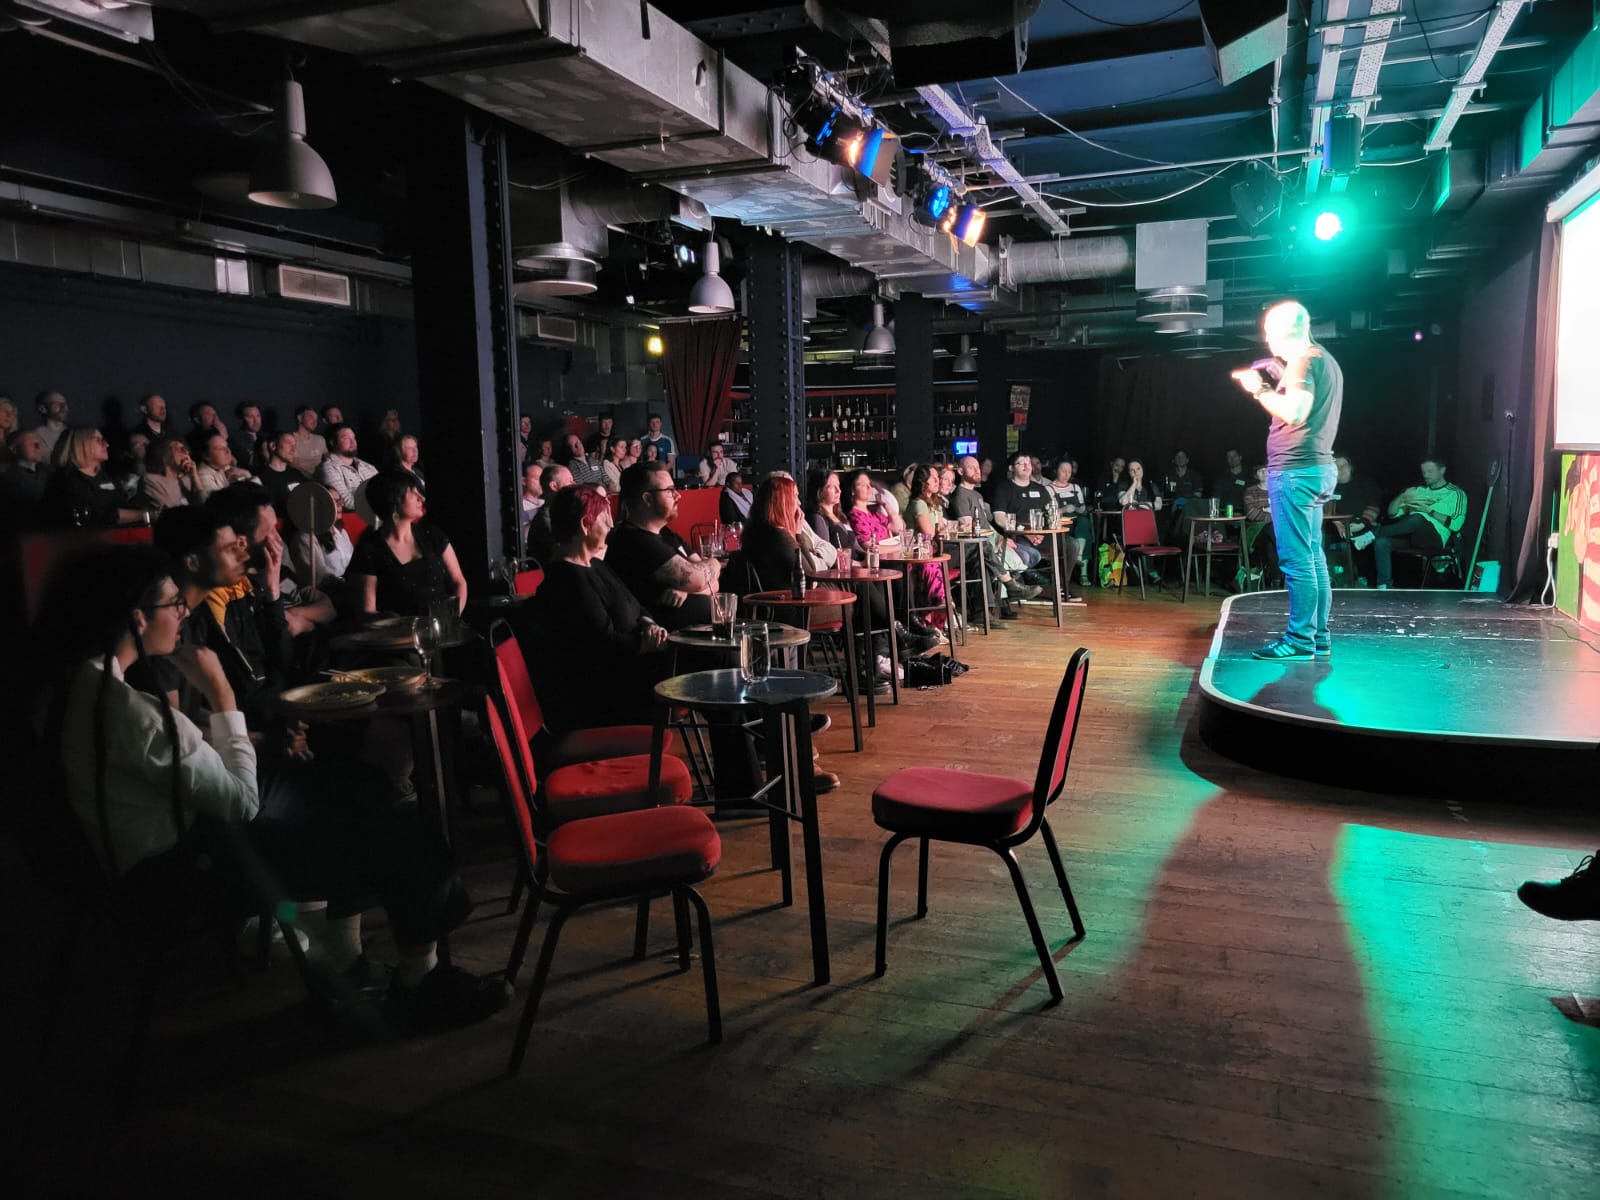 Lorimer Moseley addresses a crowd at Newcastle Comedy Club